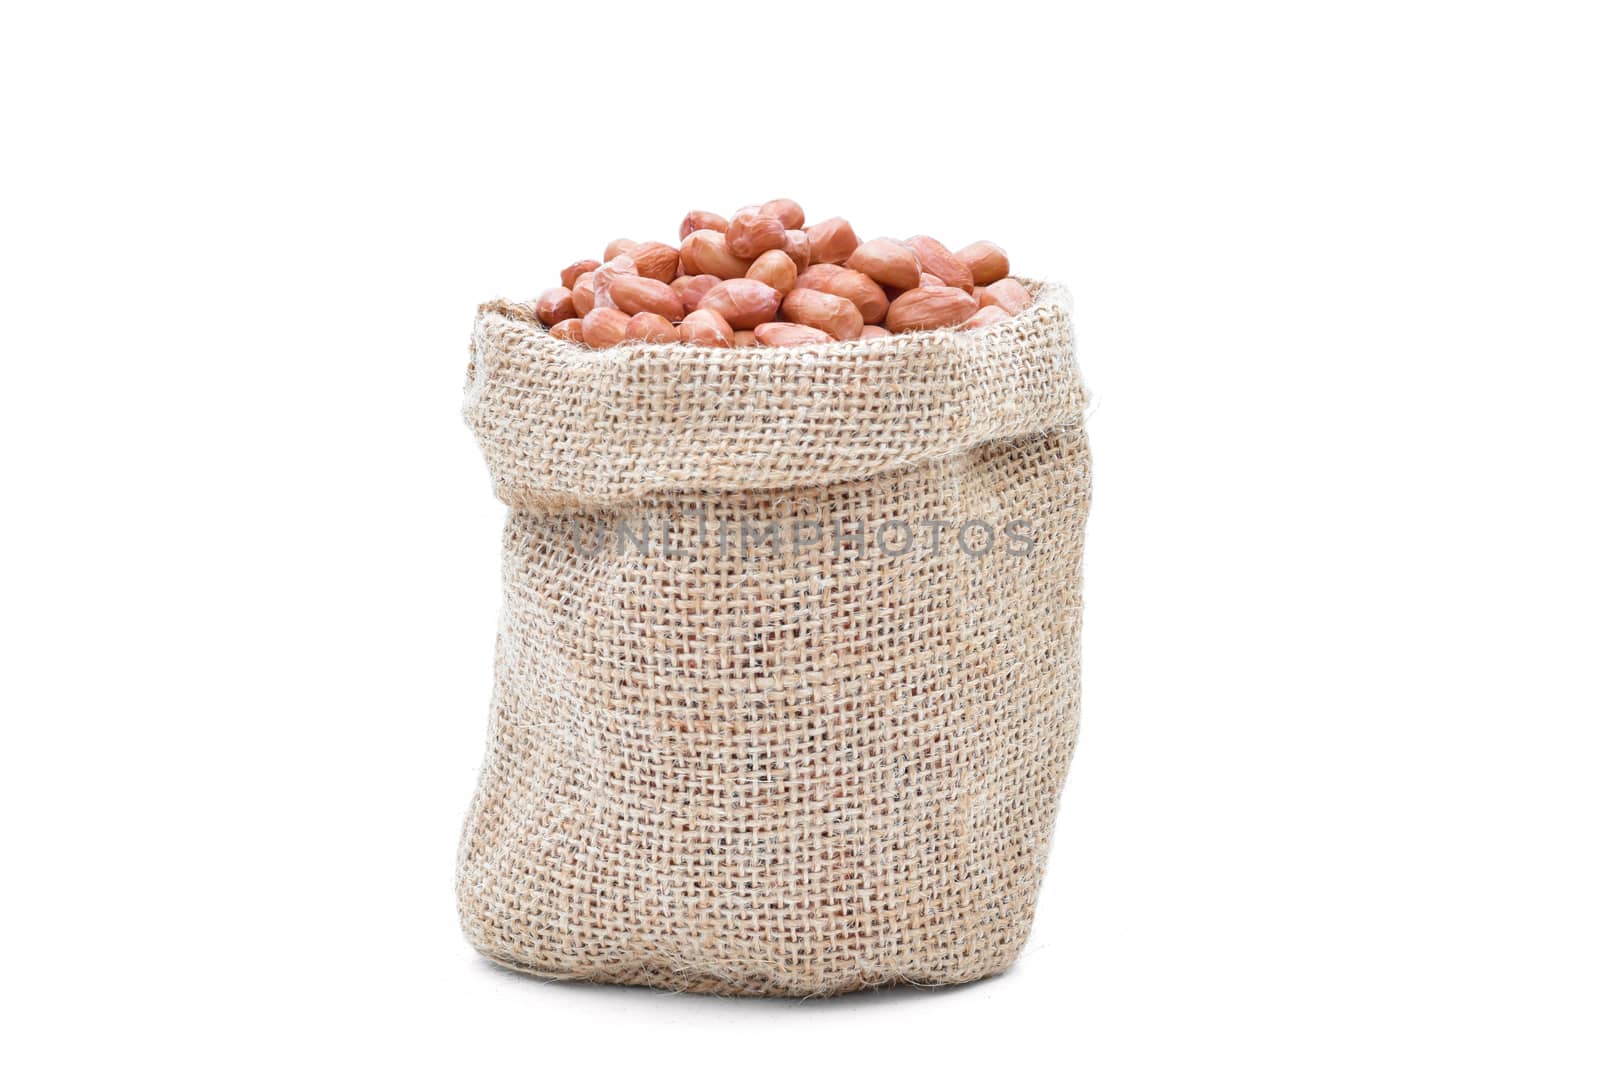 Peanuts raw grains in a sack of on white background by sompongtom